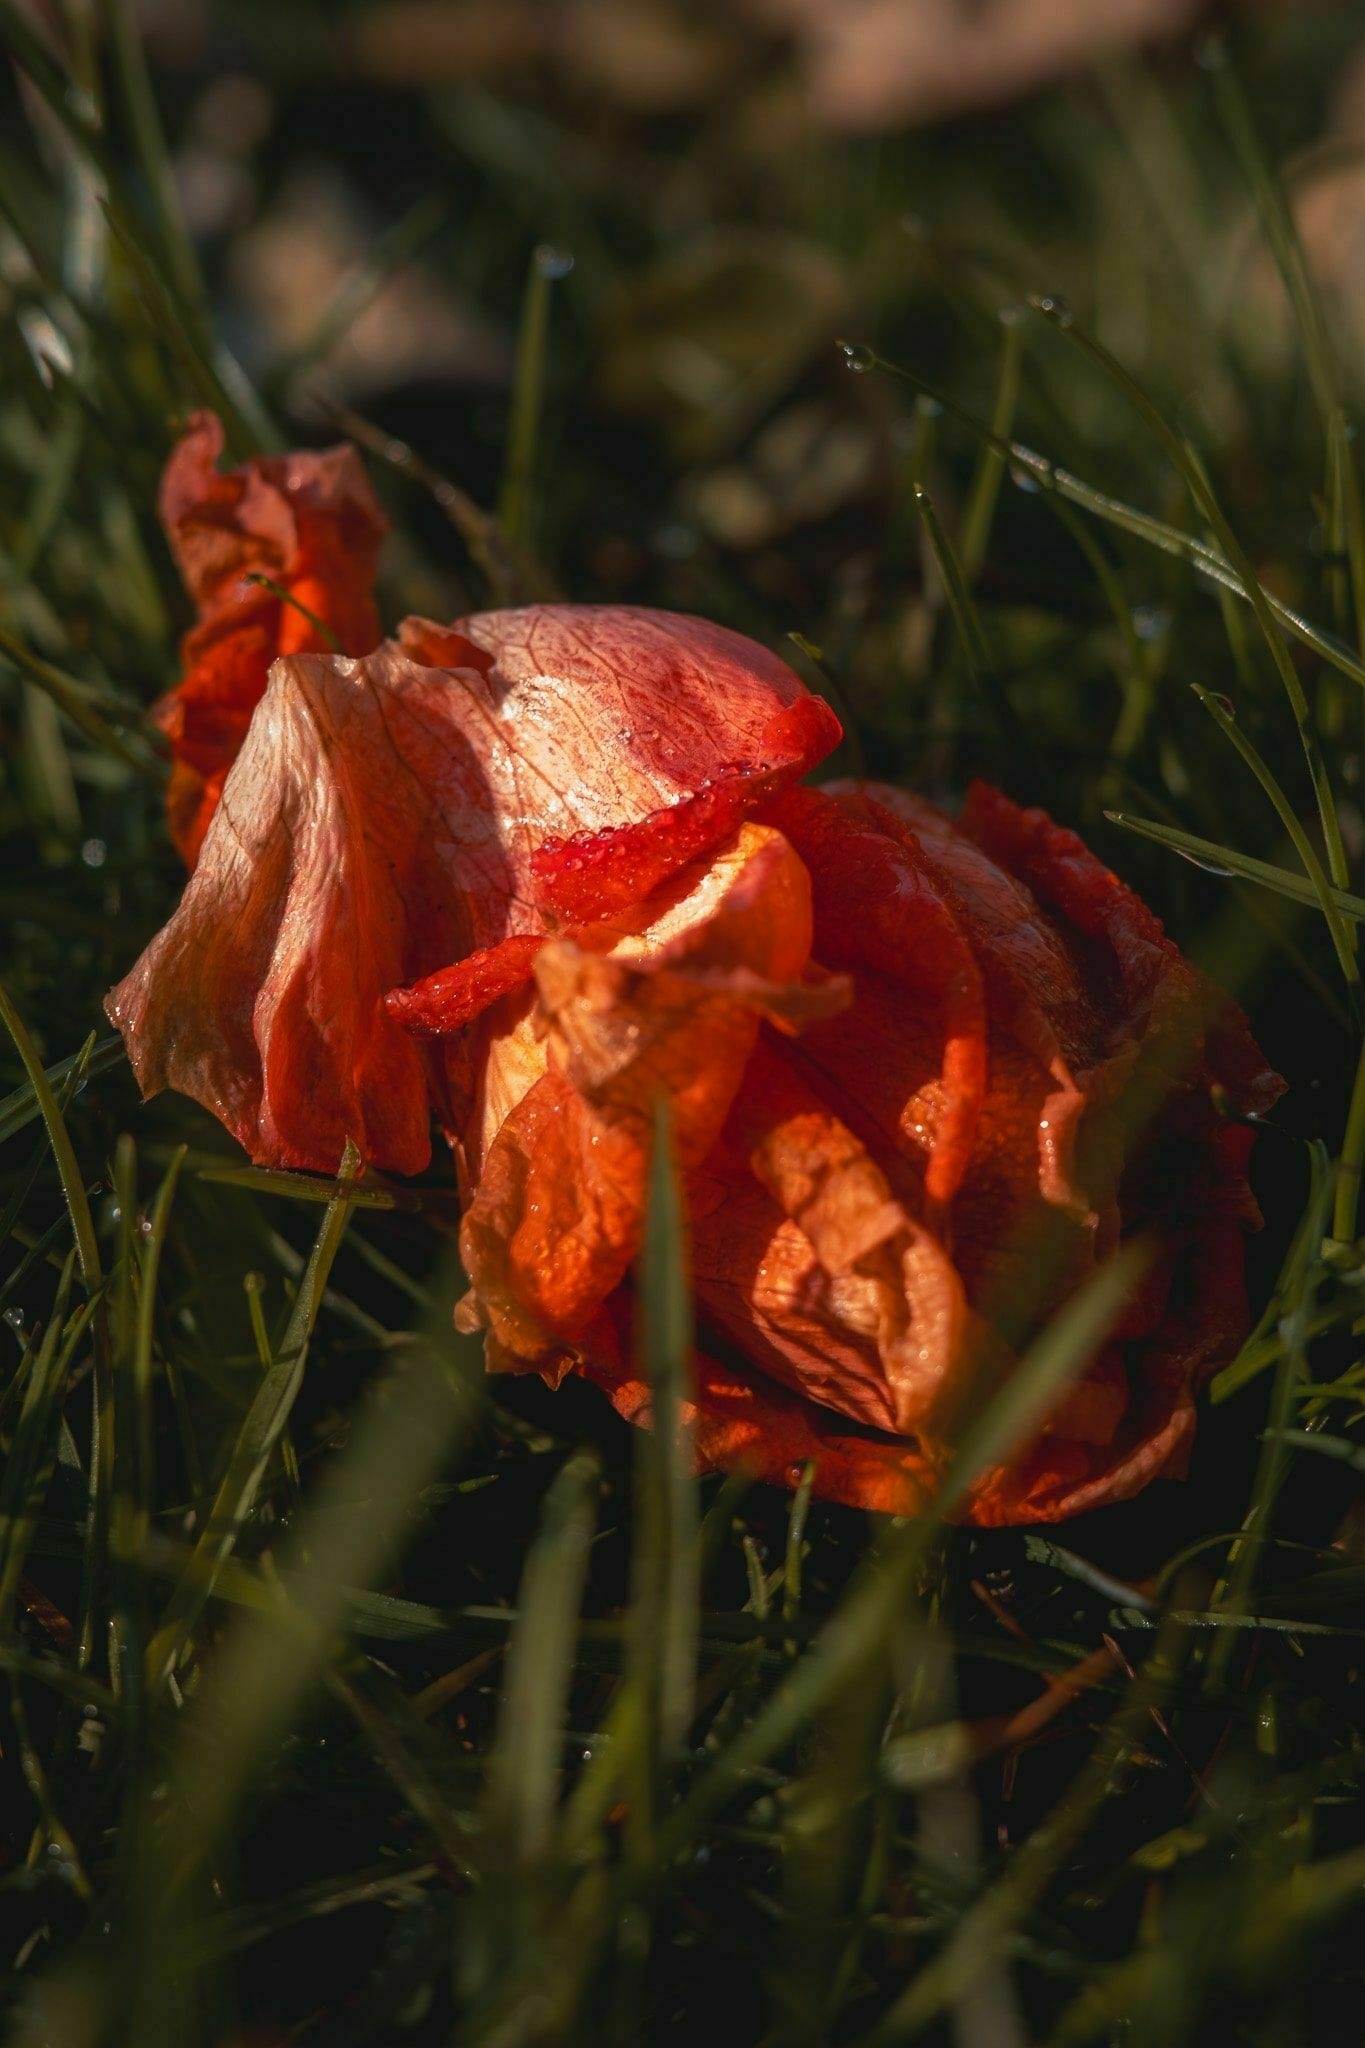 a rose left in wet grass to rot